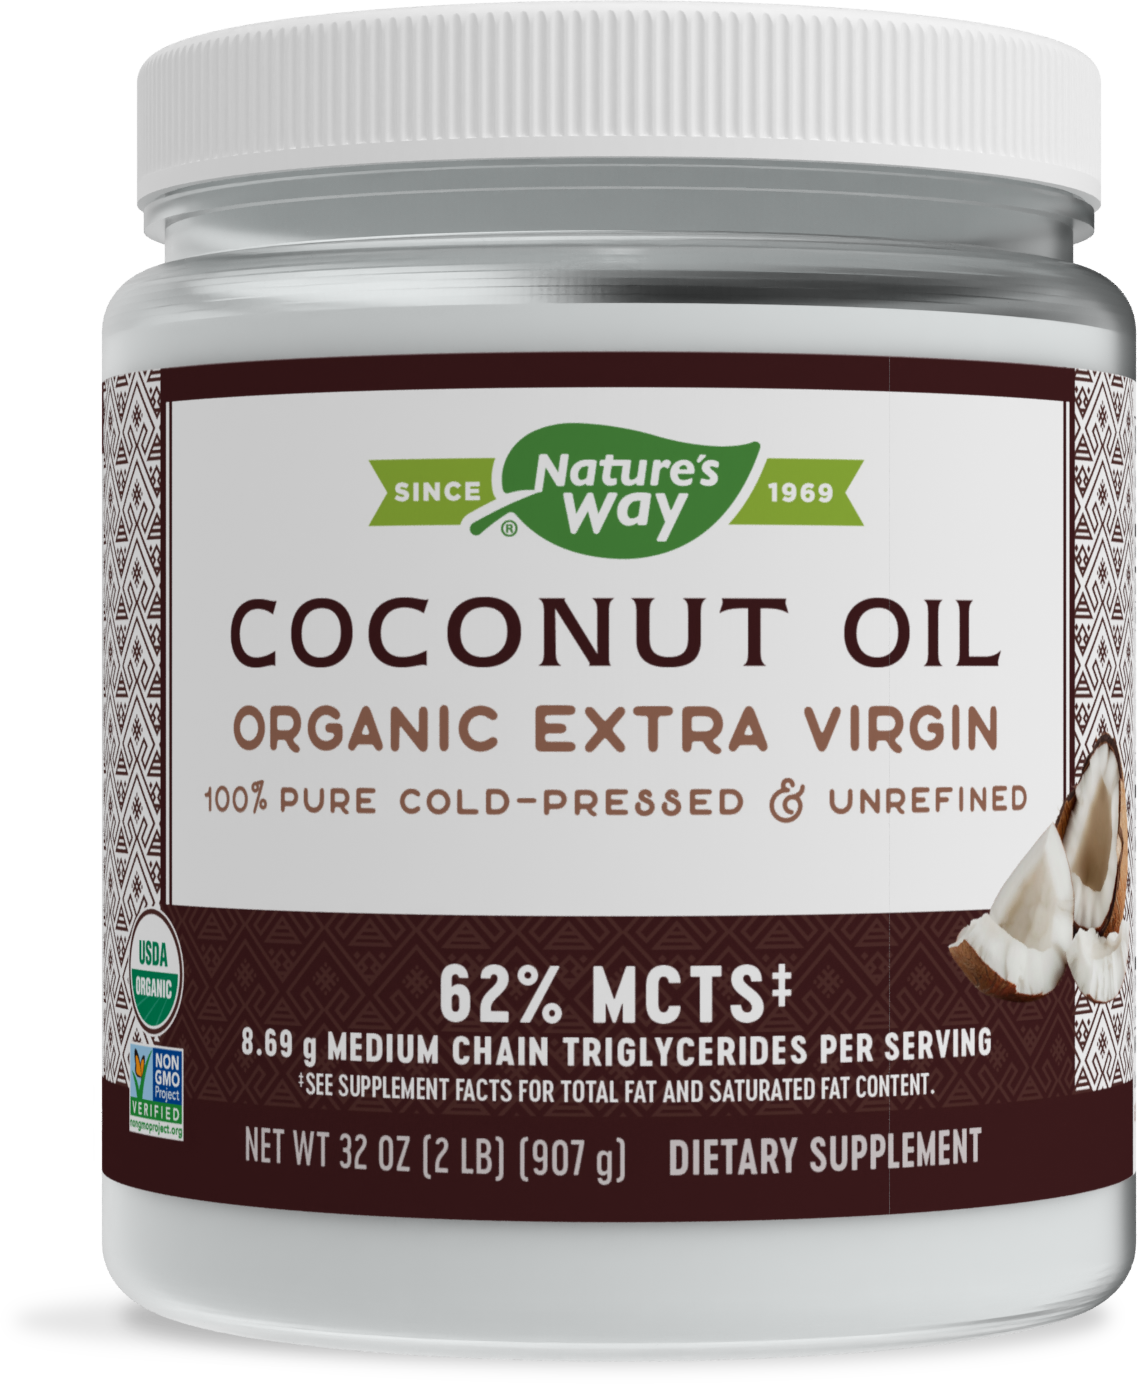 Organic Virgin Coconut Oil Pure-Cold Pressed 6oz. for Skin & Hair